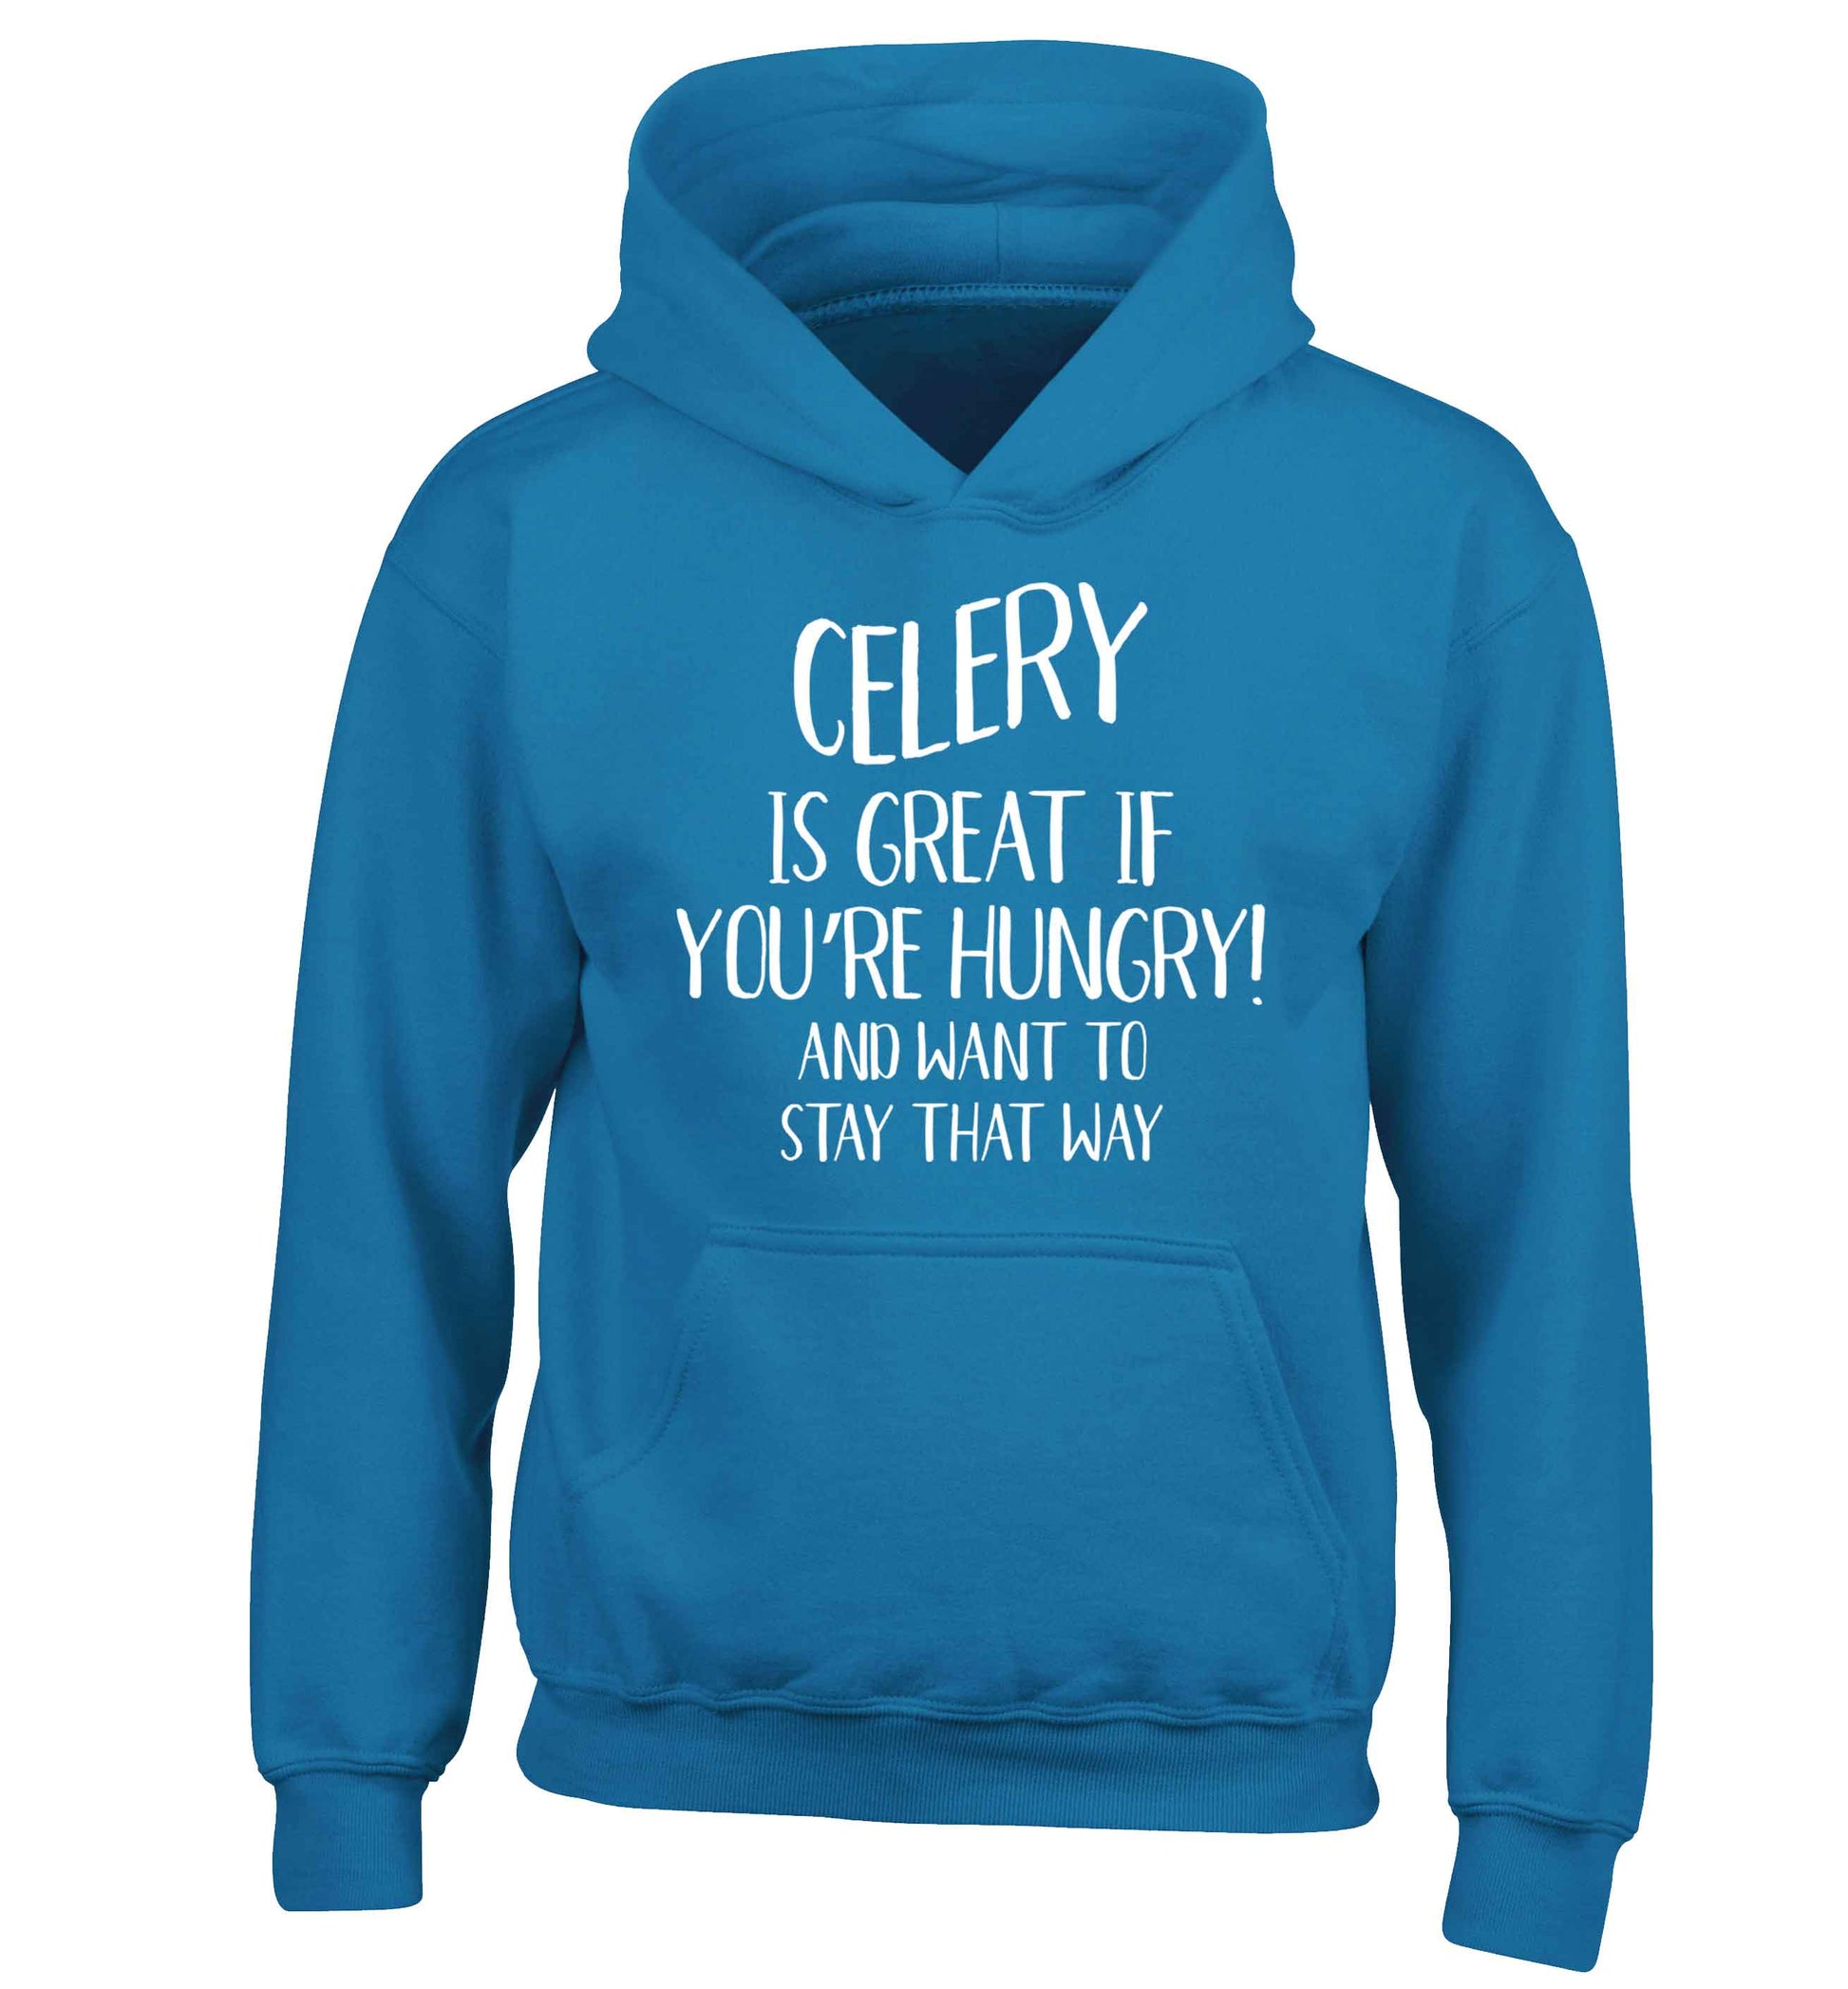 Cellery is great when you're hungry and want to stay that way children's blue hoodie 12-13 Years